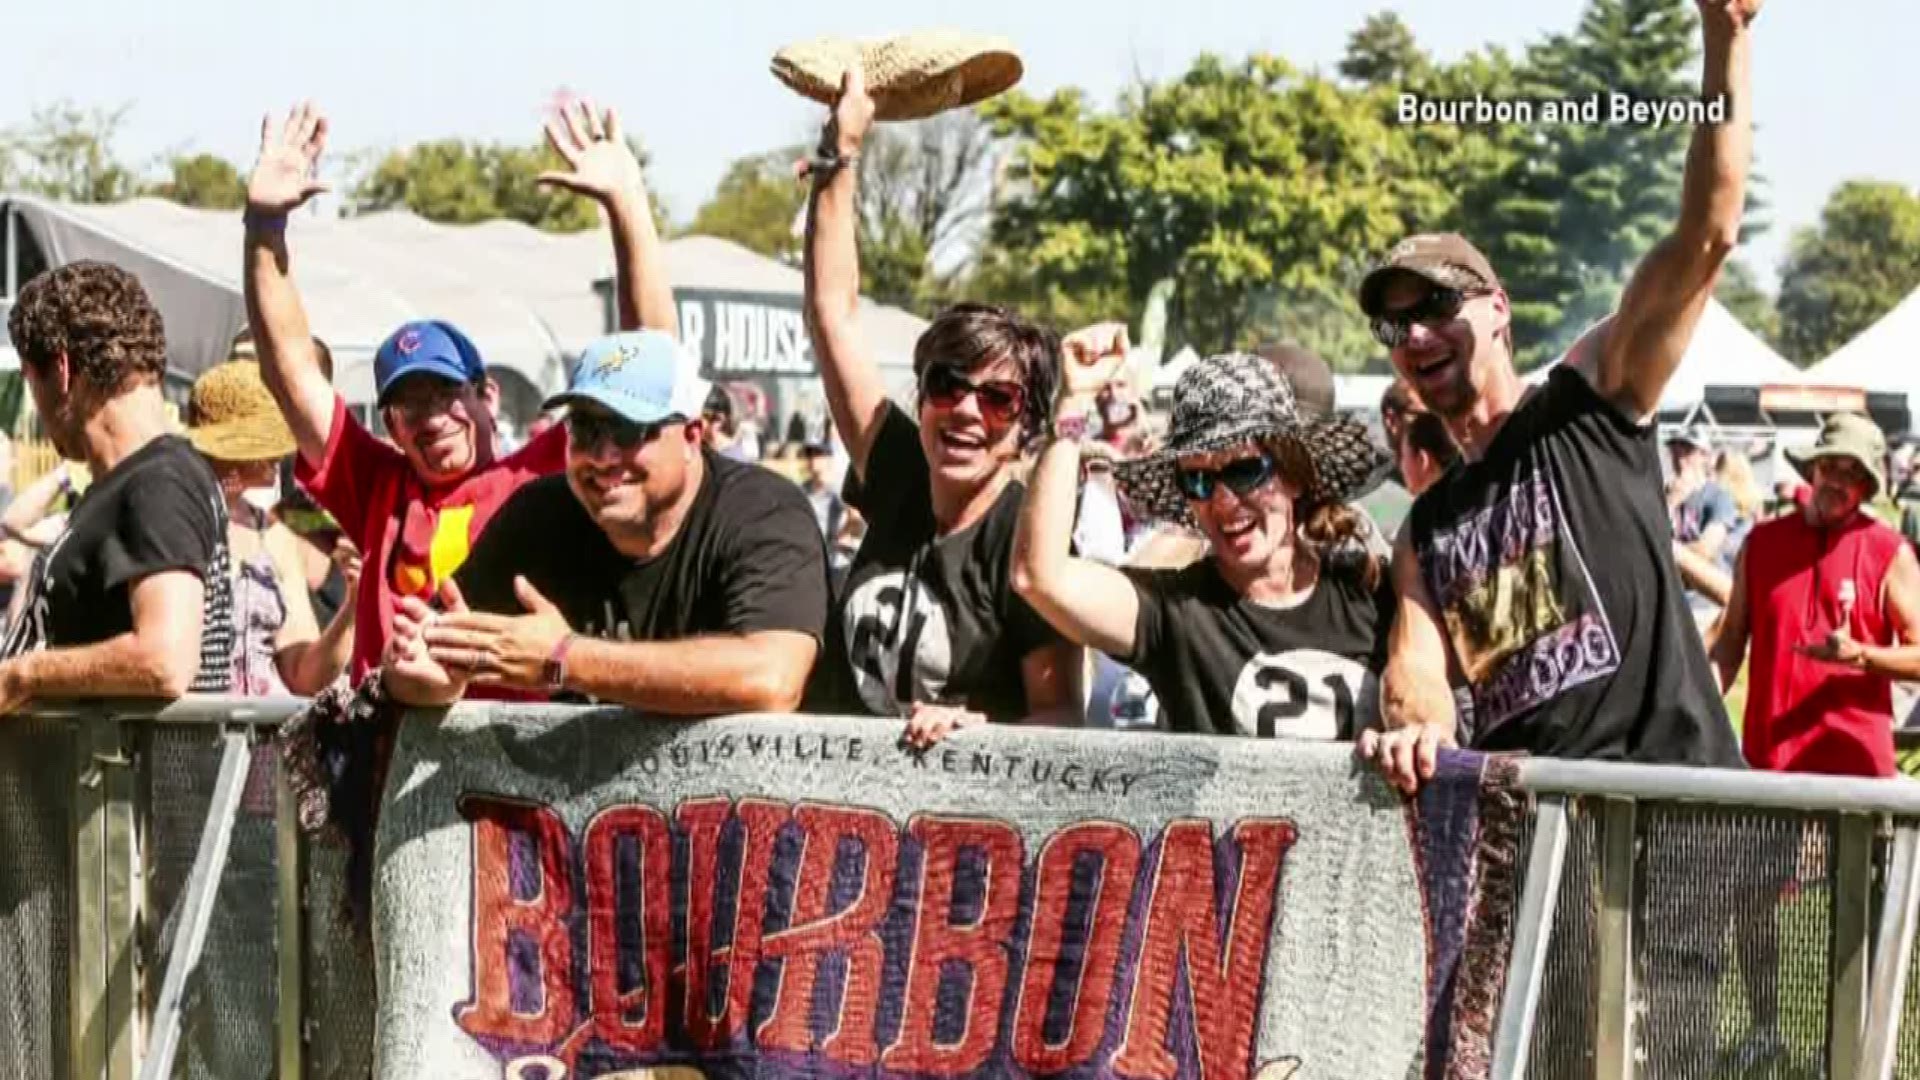 Up to 50,000 fans are expected to fill up Champions Park Sept. 21-22 as Bourbon and Beyond 2018 kicks off.